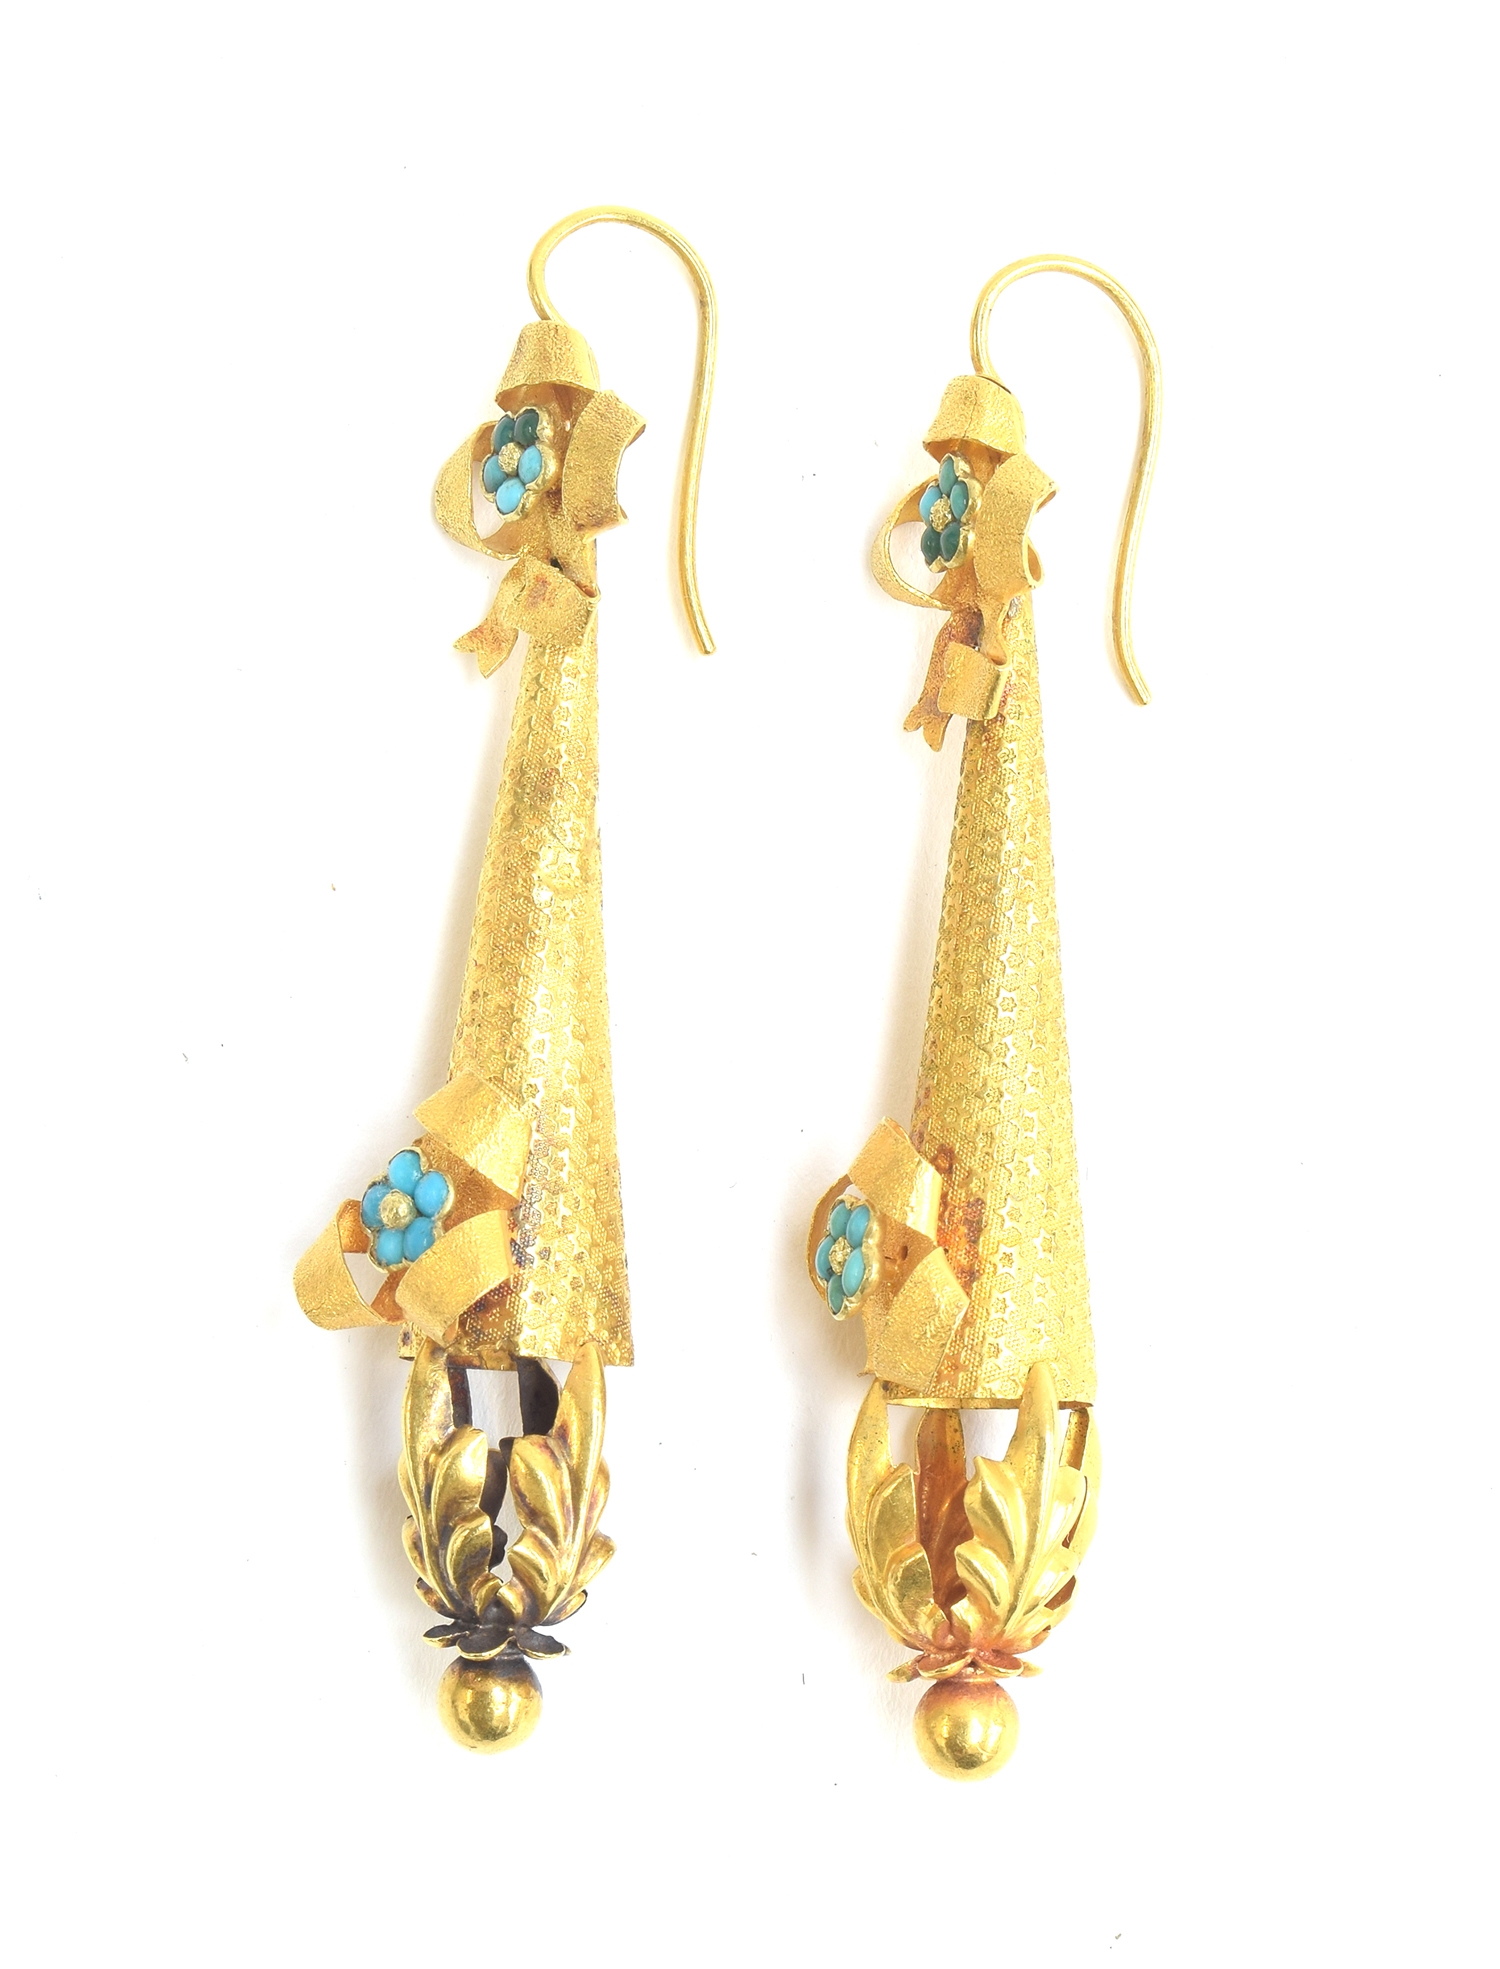 A pair of mid Victorian gold torpedo drop earrings, decorated with bows and turquoise forget-me-